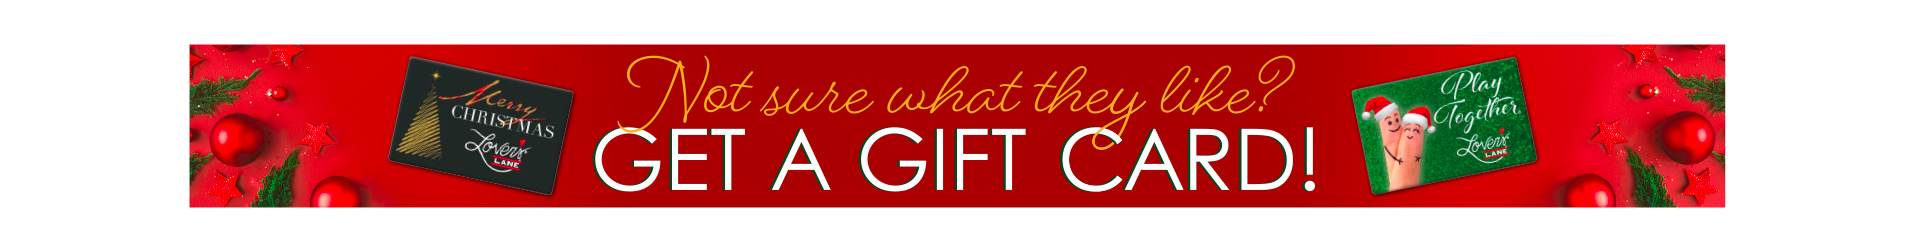 Not sure what they like? Get a Gift Card!